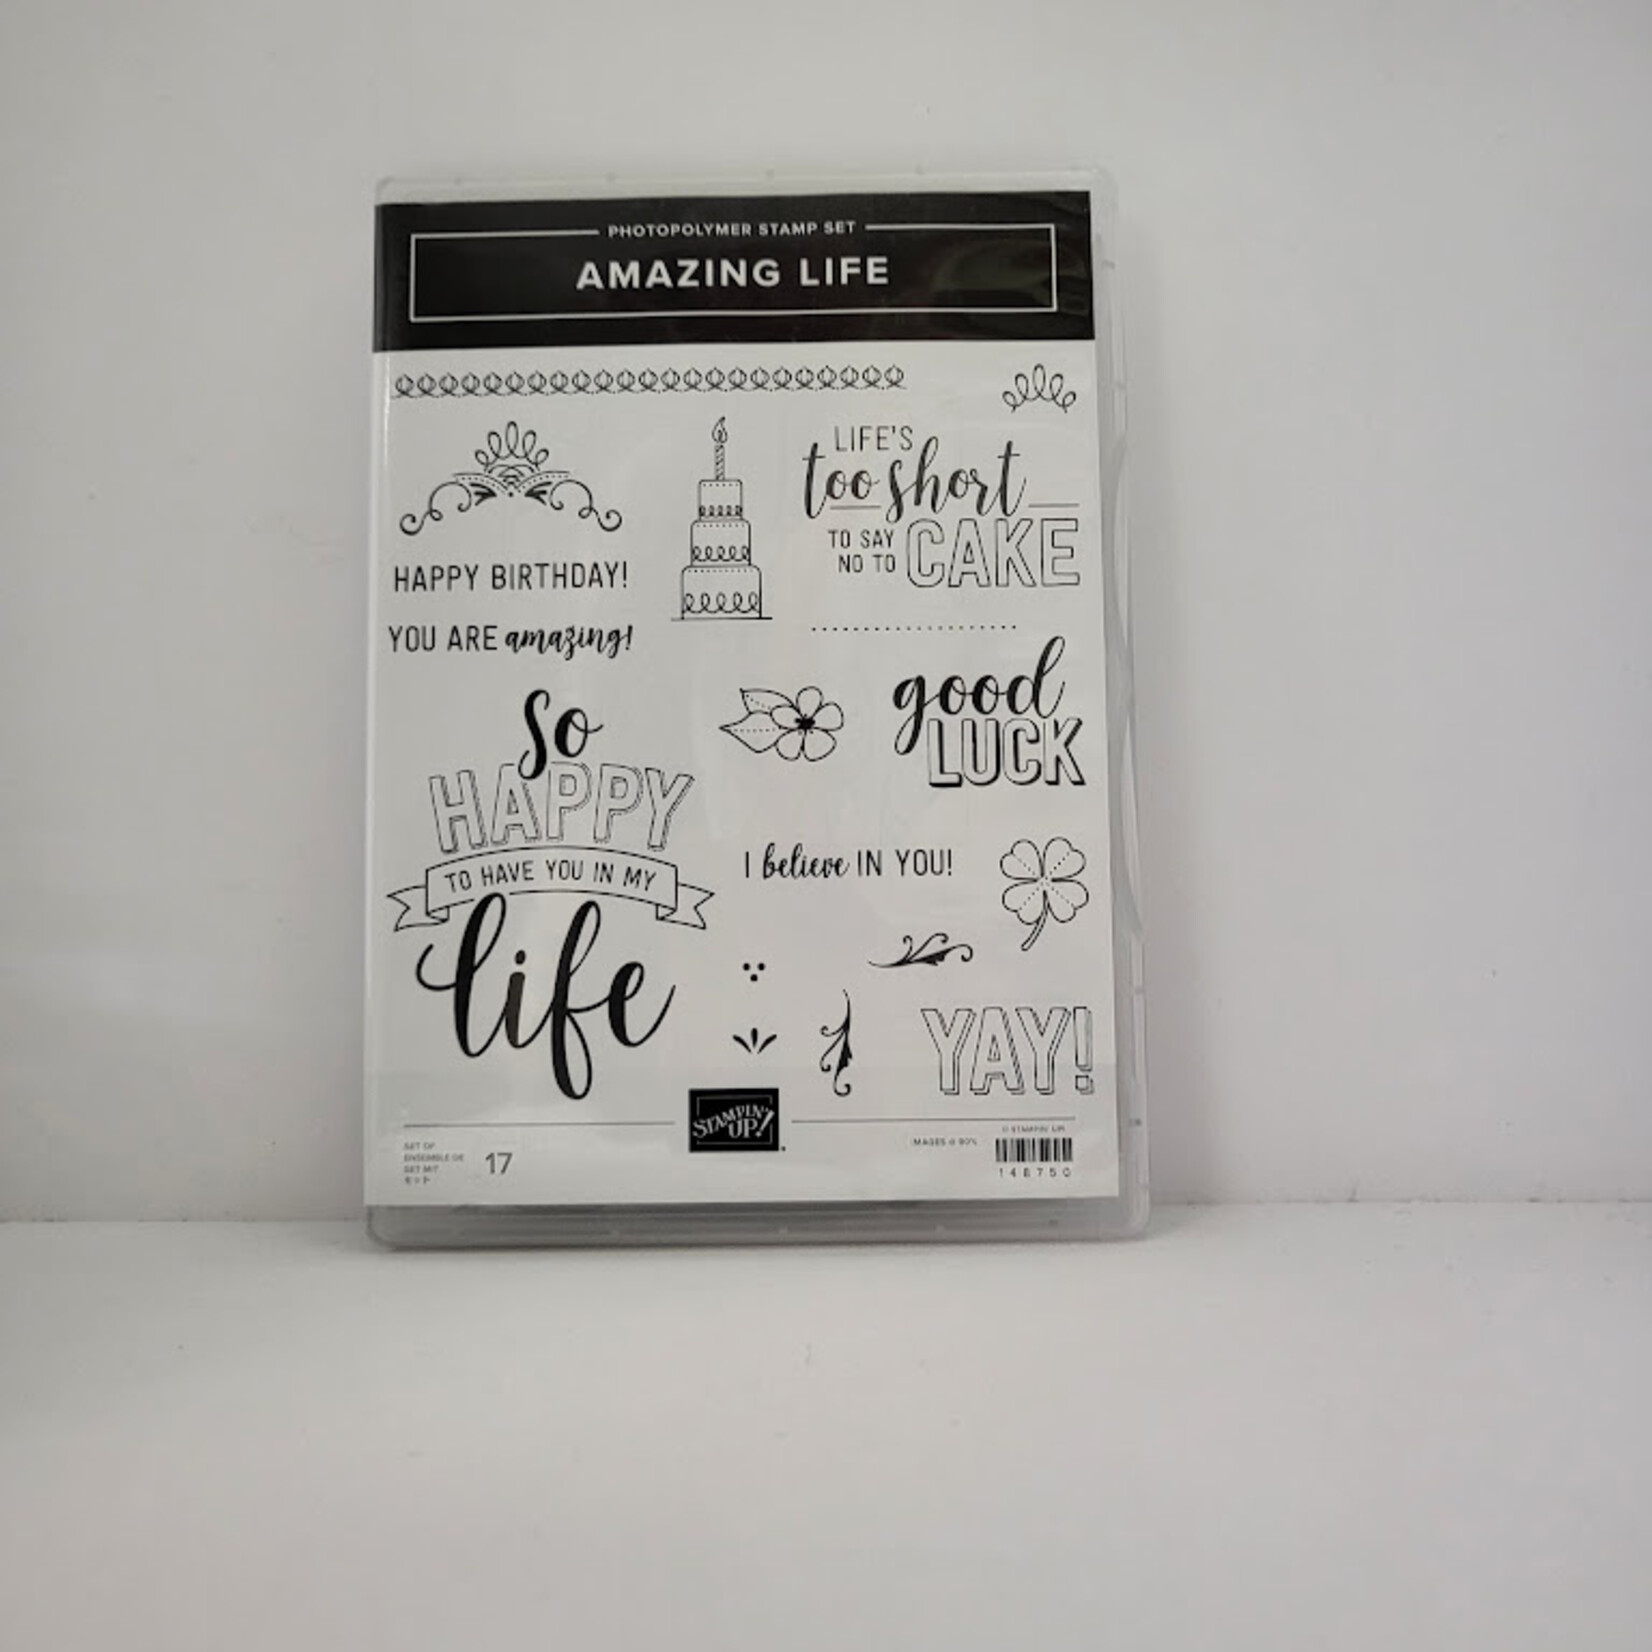 Stampin' Up Photopolymer Stamp et - Amazing Life